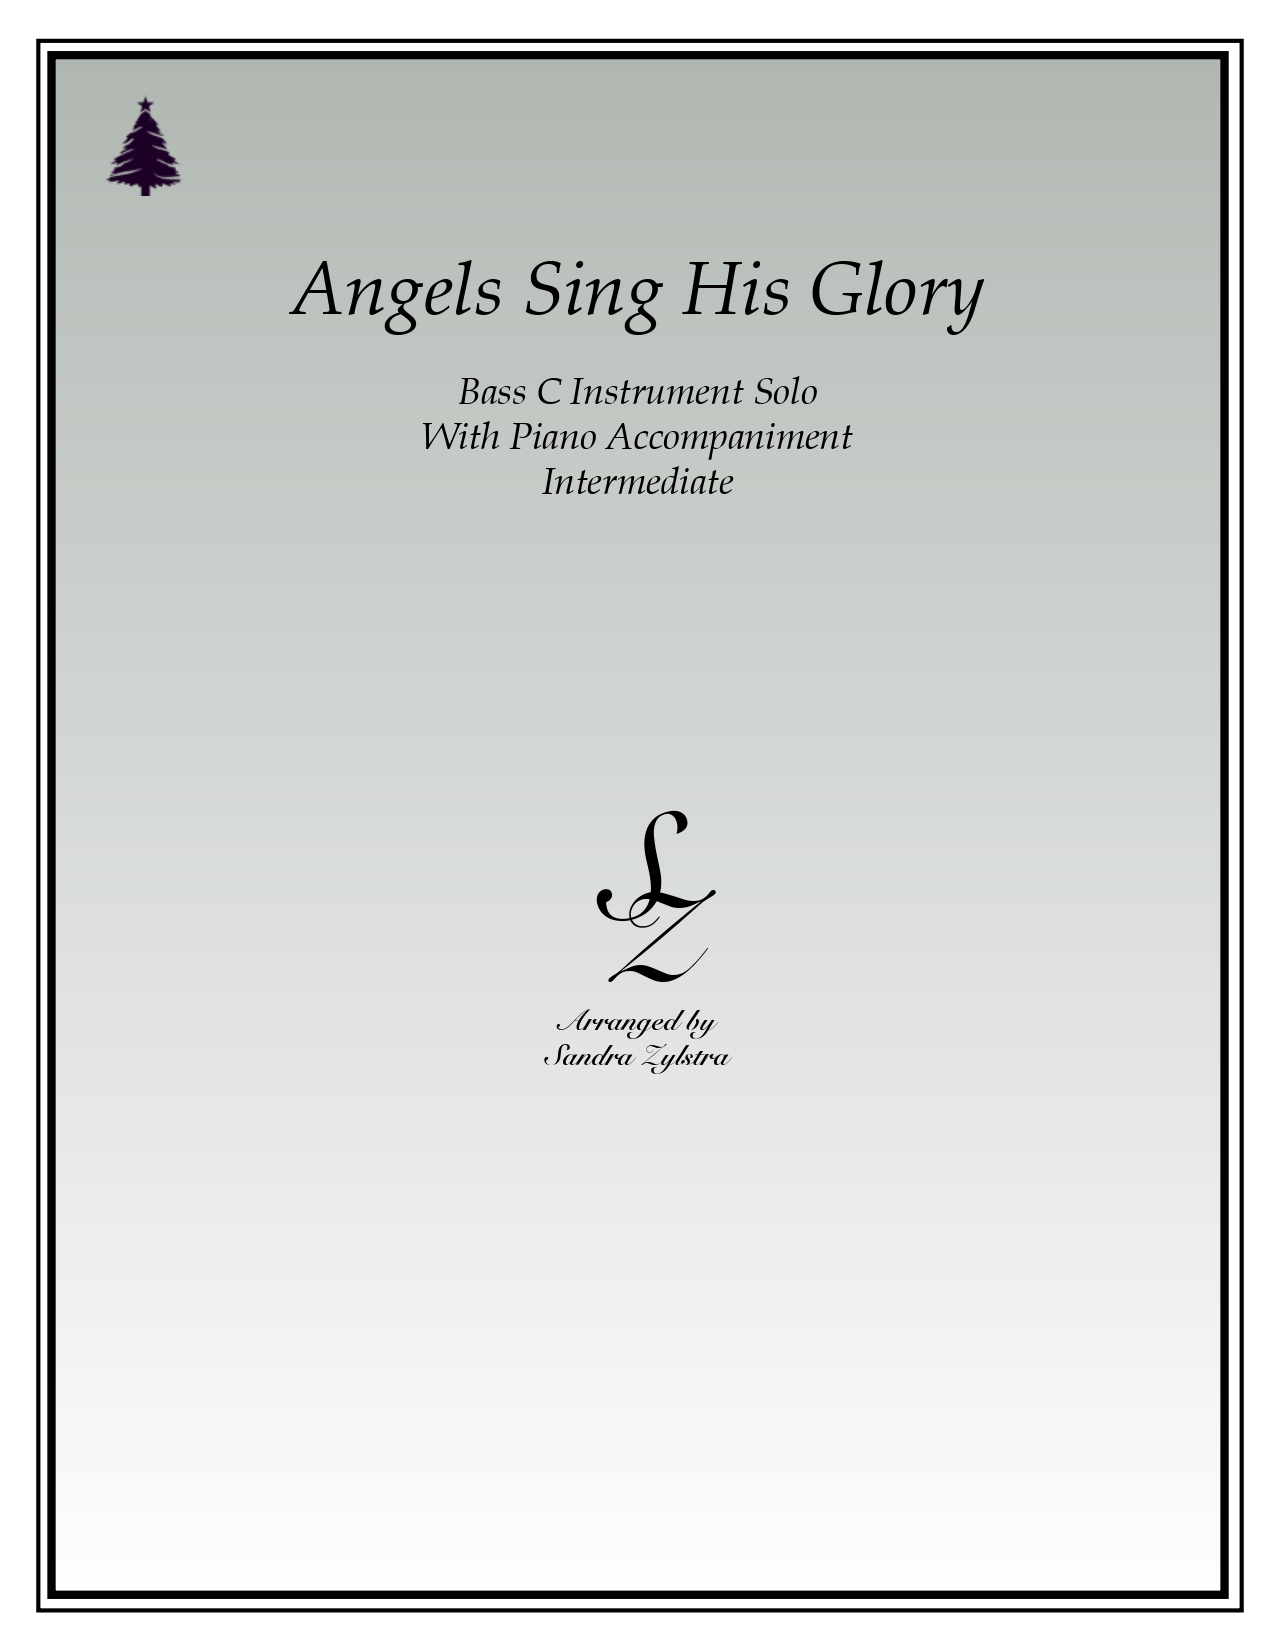 Angels Sing His Glory bass C instrument solo part cover page 00011